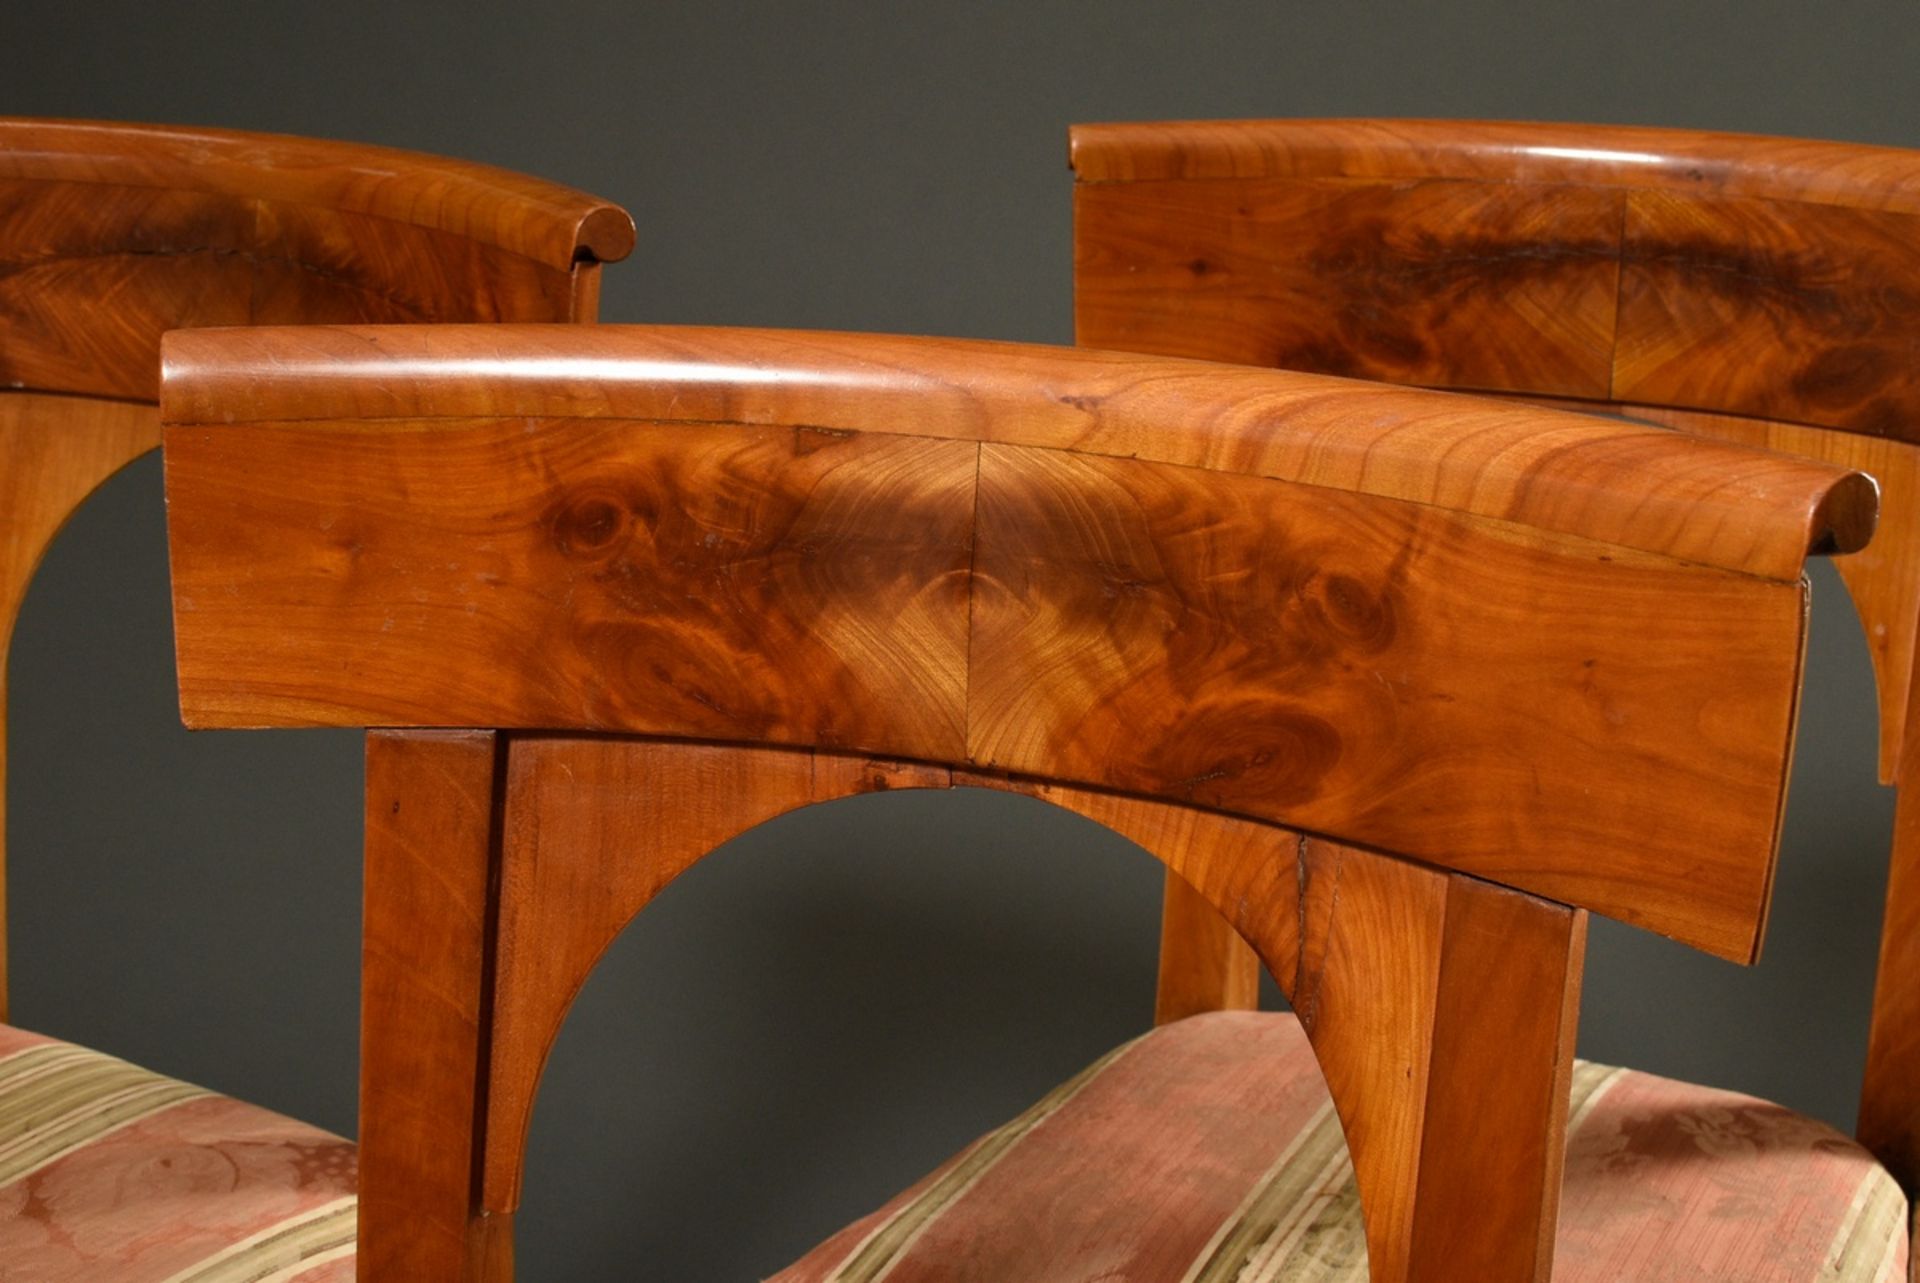 4 plain Biedermeier chairs with shovel backrest and arched element in the back, cherry veneer, 1st  - Image 5 of 8